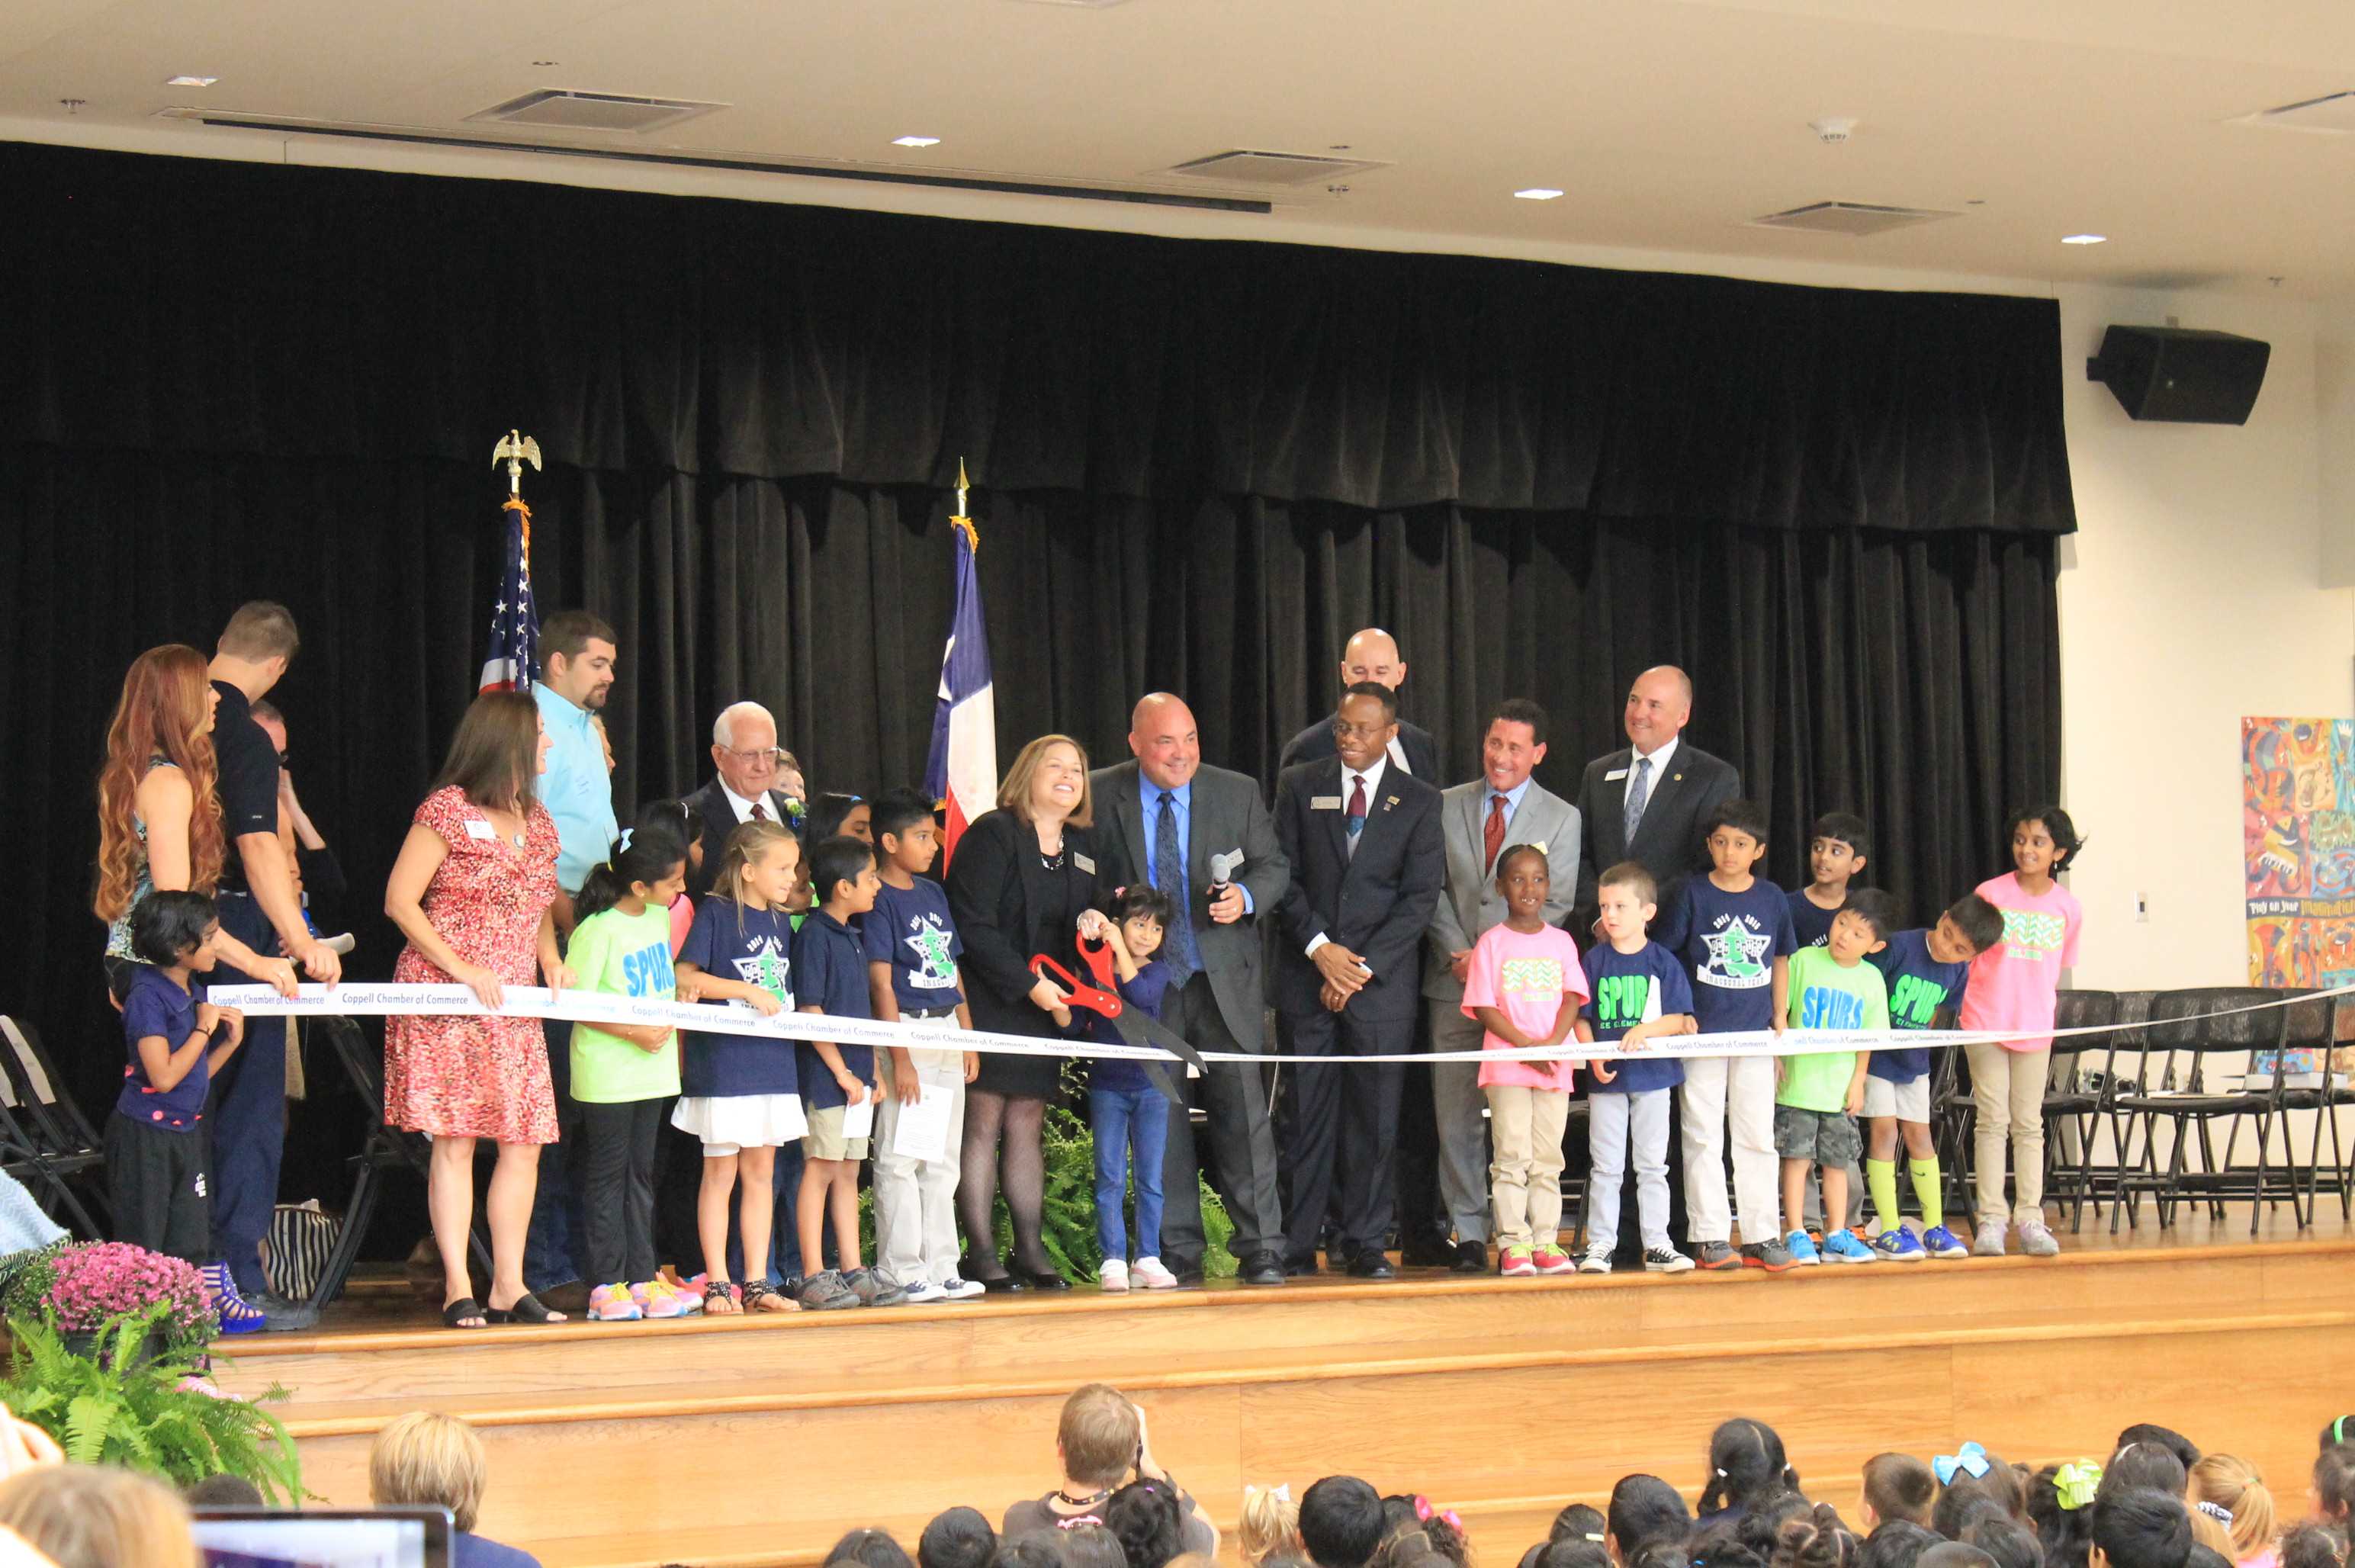 Grand opening of new Lee Elementary School makes waves in community –  Coppell Student Media